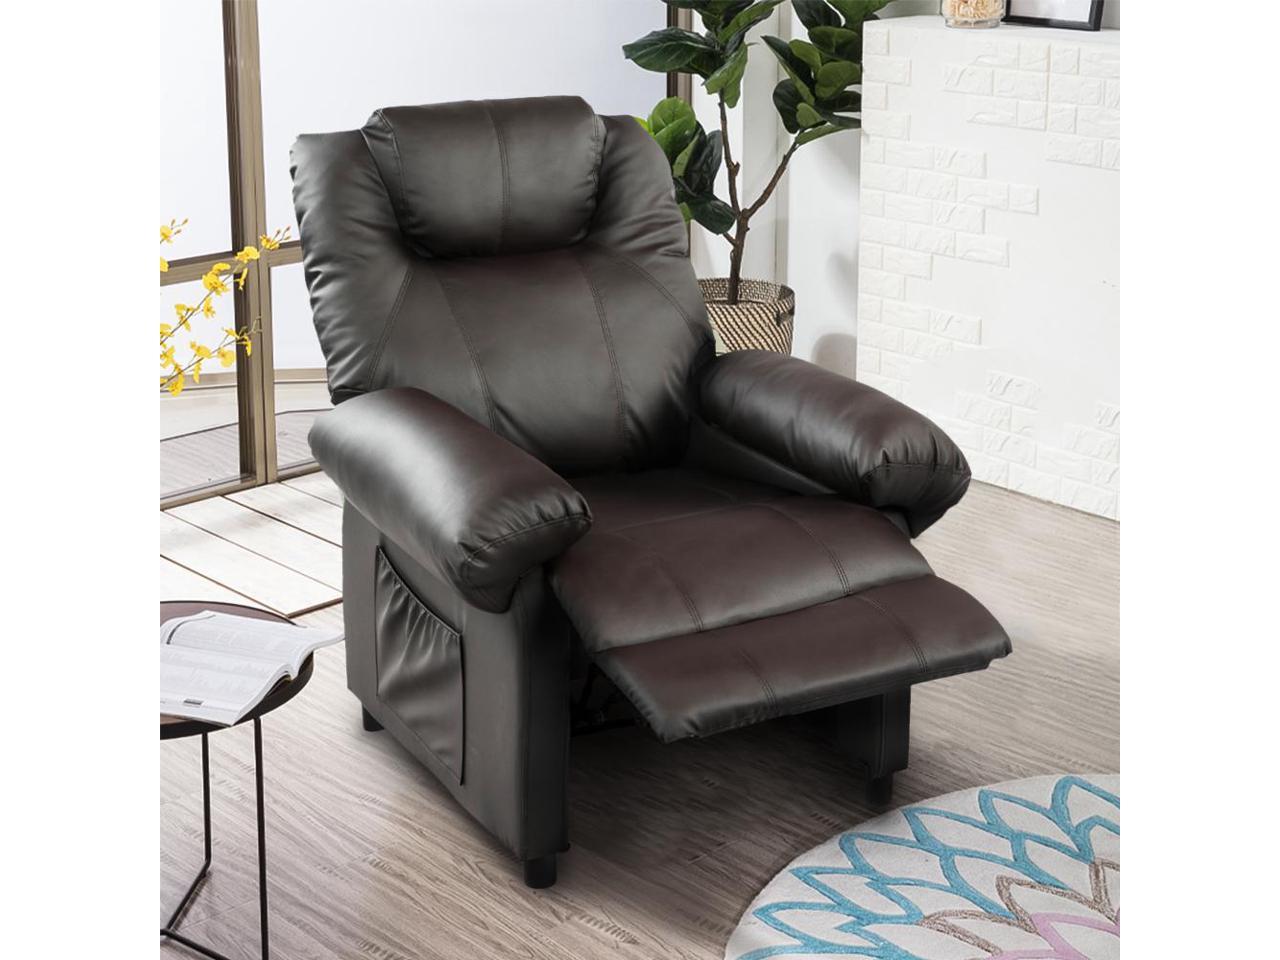 REFICCER Massage Recliner Chair Heated Reclining Sofa Chair Ergonomic Lounge Chair for Living Room Single Sofa Chair Padded Seat with 2 Side Pockets, Vibration Function (PU Leather Brown)